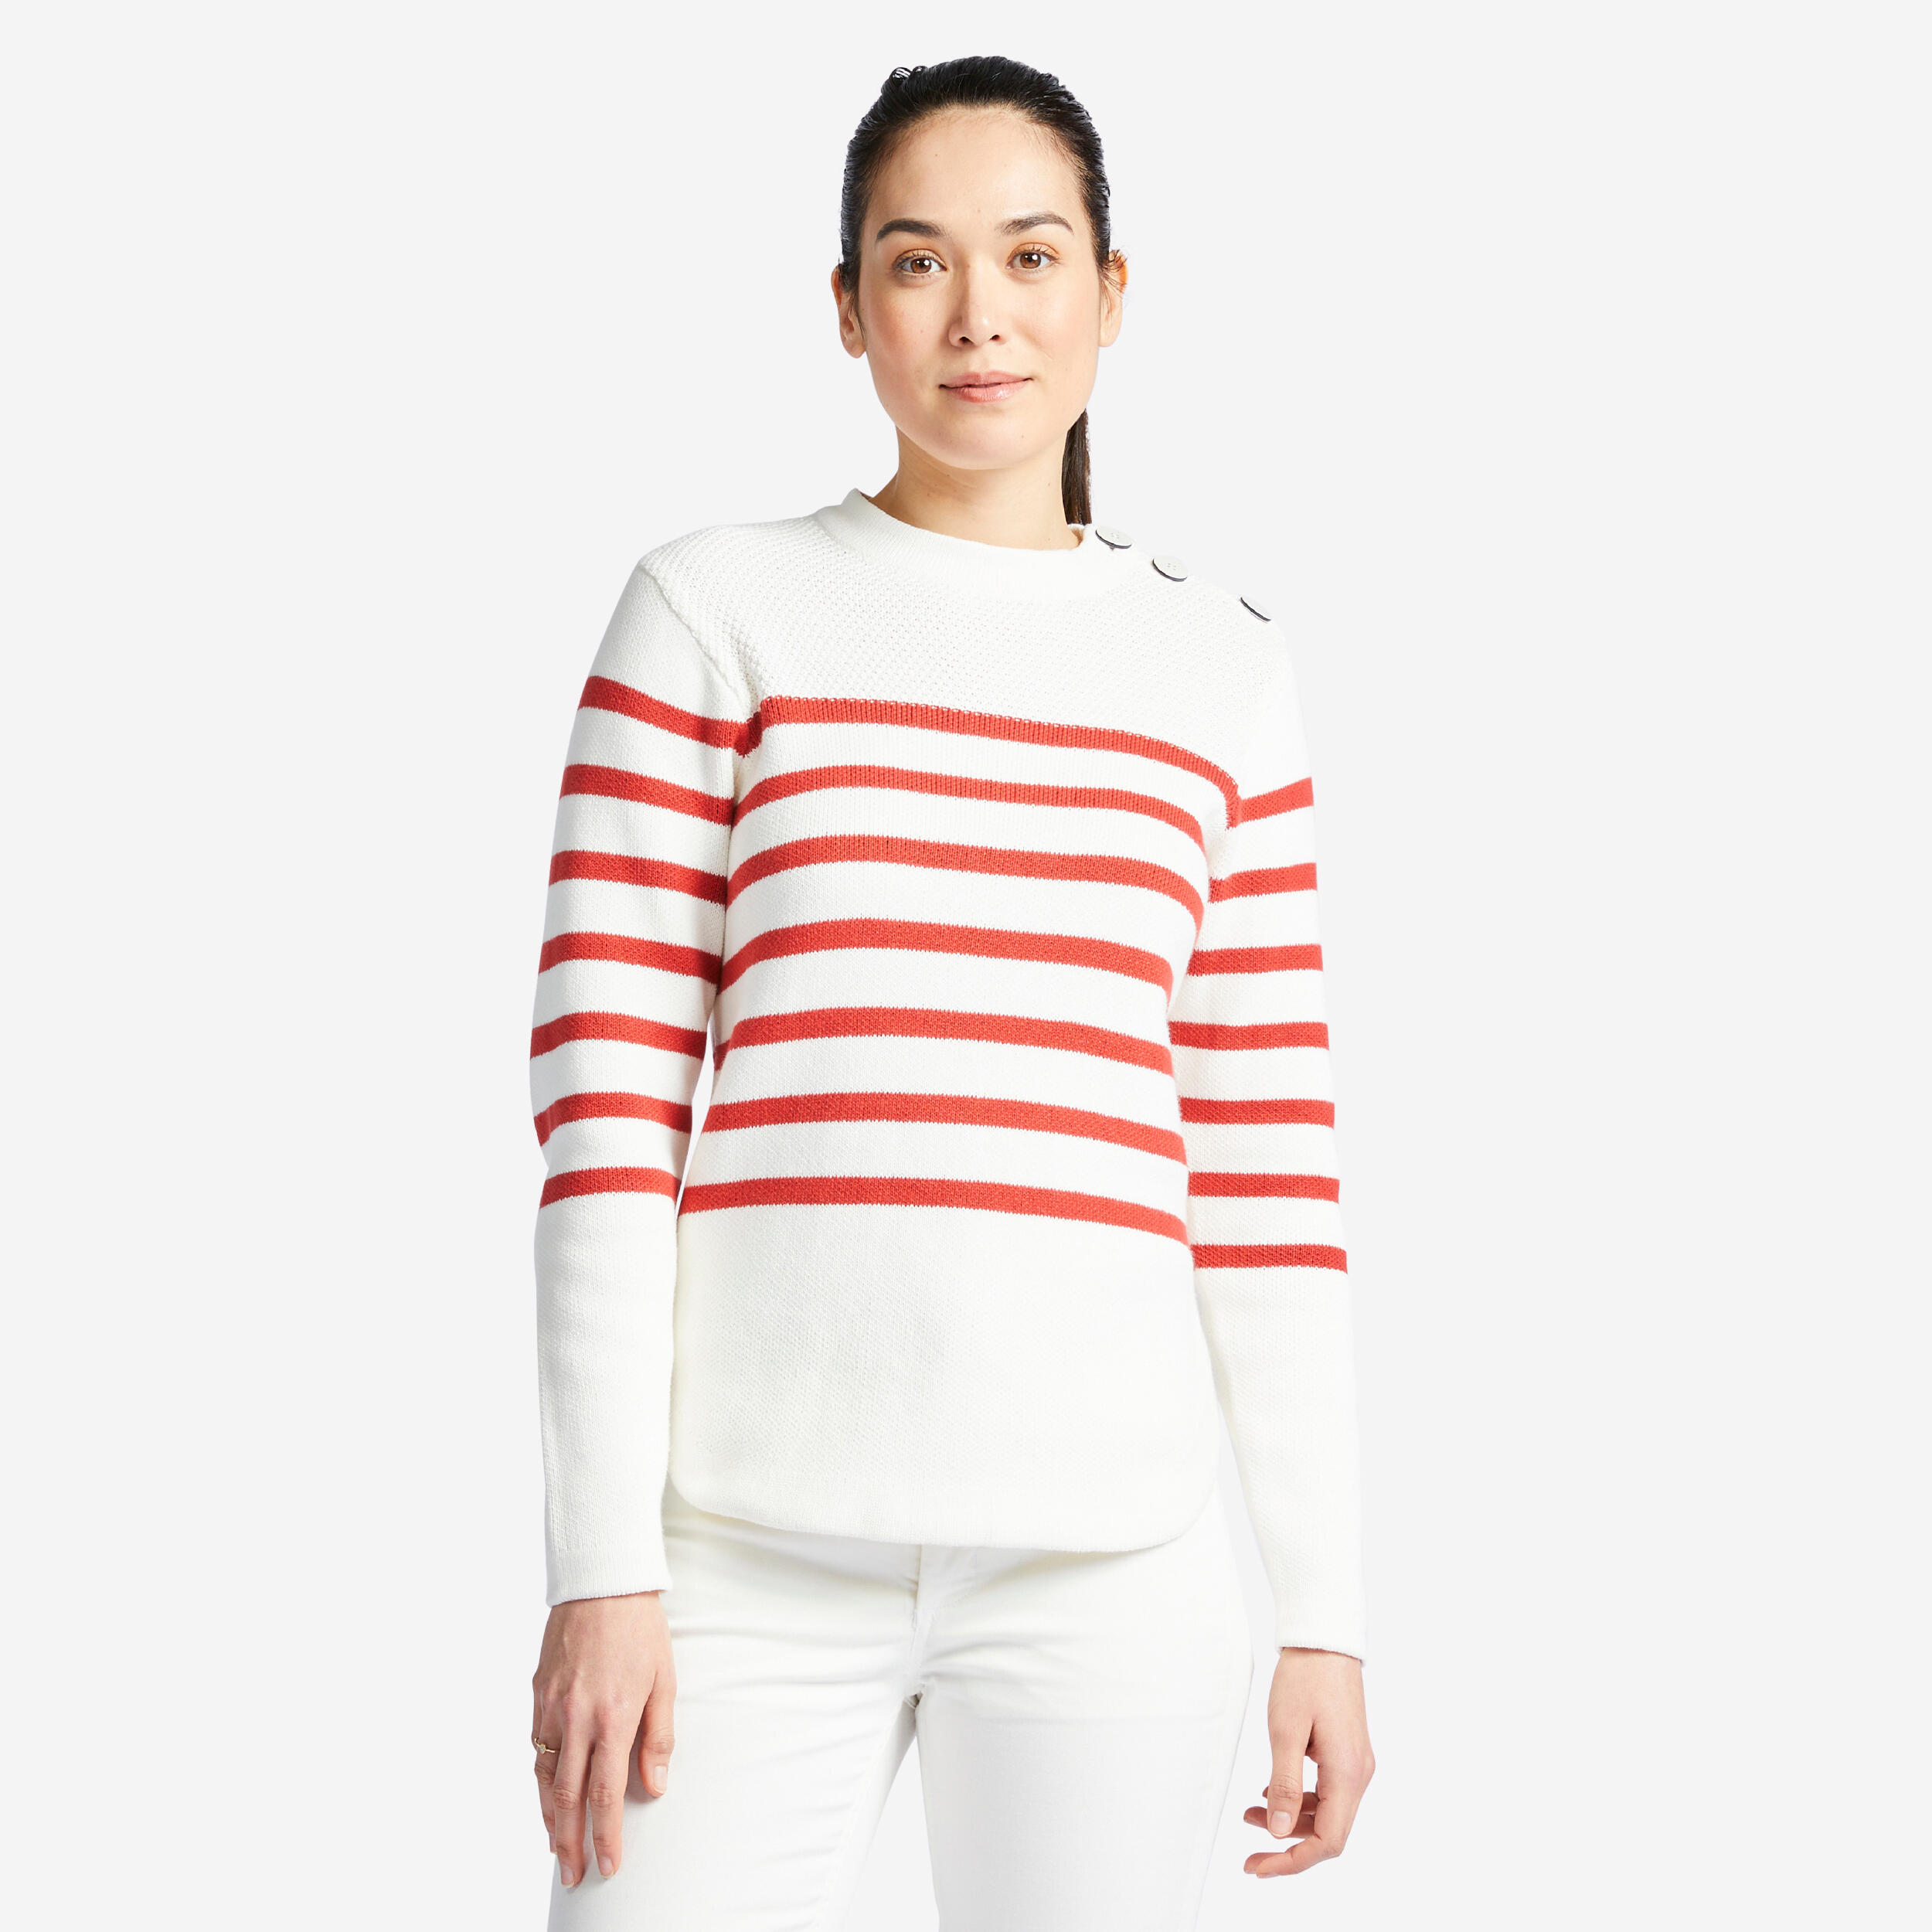 TRIBORD Women's Marine Pullover - White and Red Striped